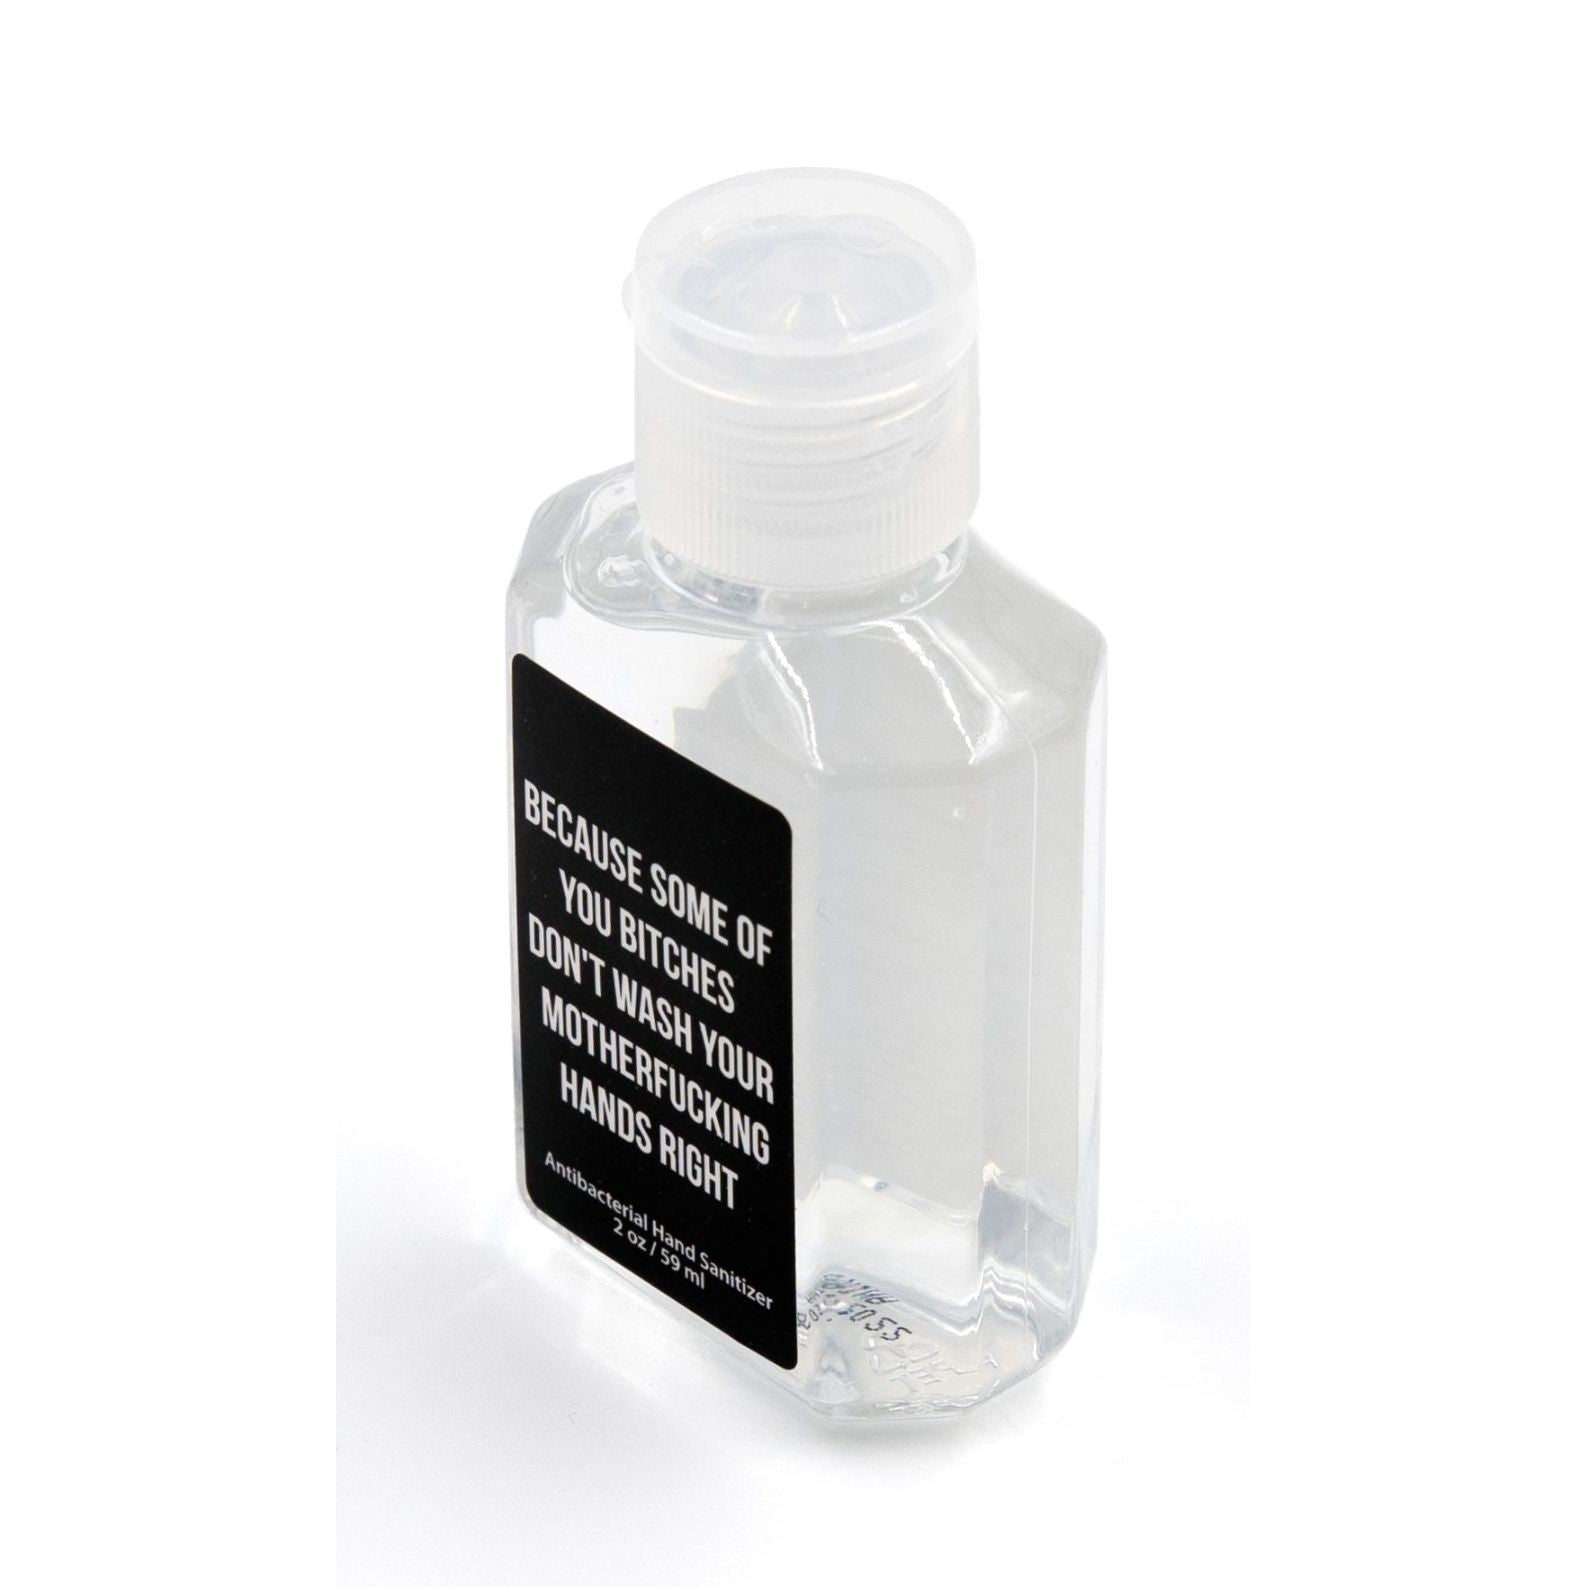 I Normally Give Zero Fucks But I Give All the Fucks About Clean Hands Hand Sanitizer | 62% Alcohol Antibacterial